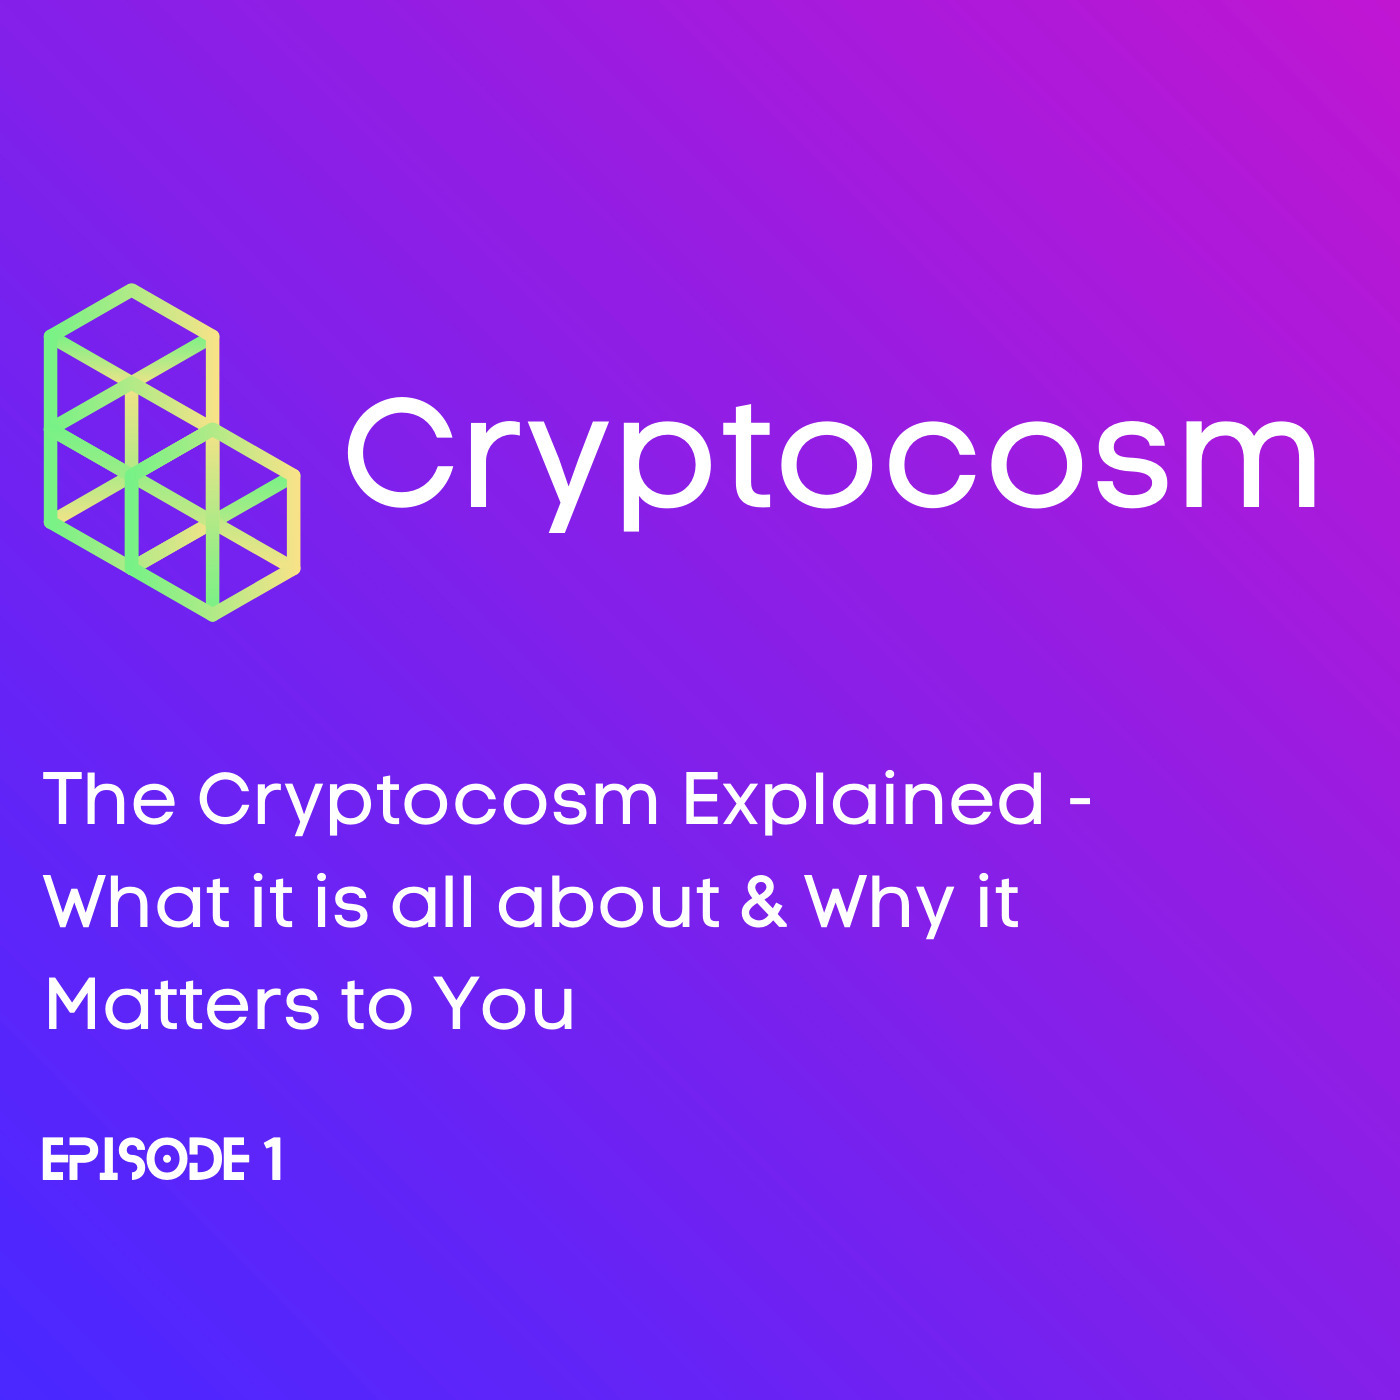 Cryptocosm Explained - What It's All About & WHY It Matters